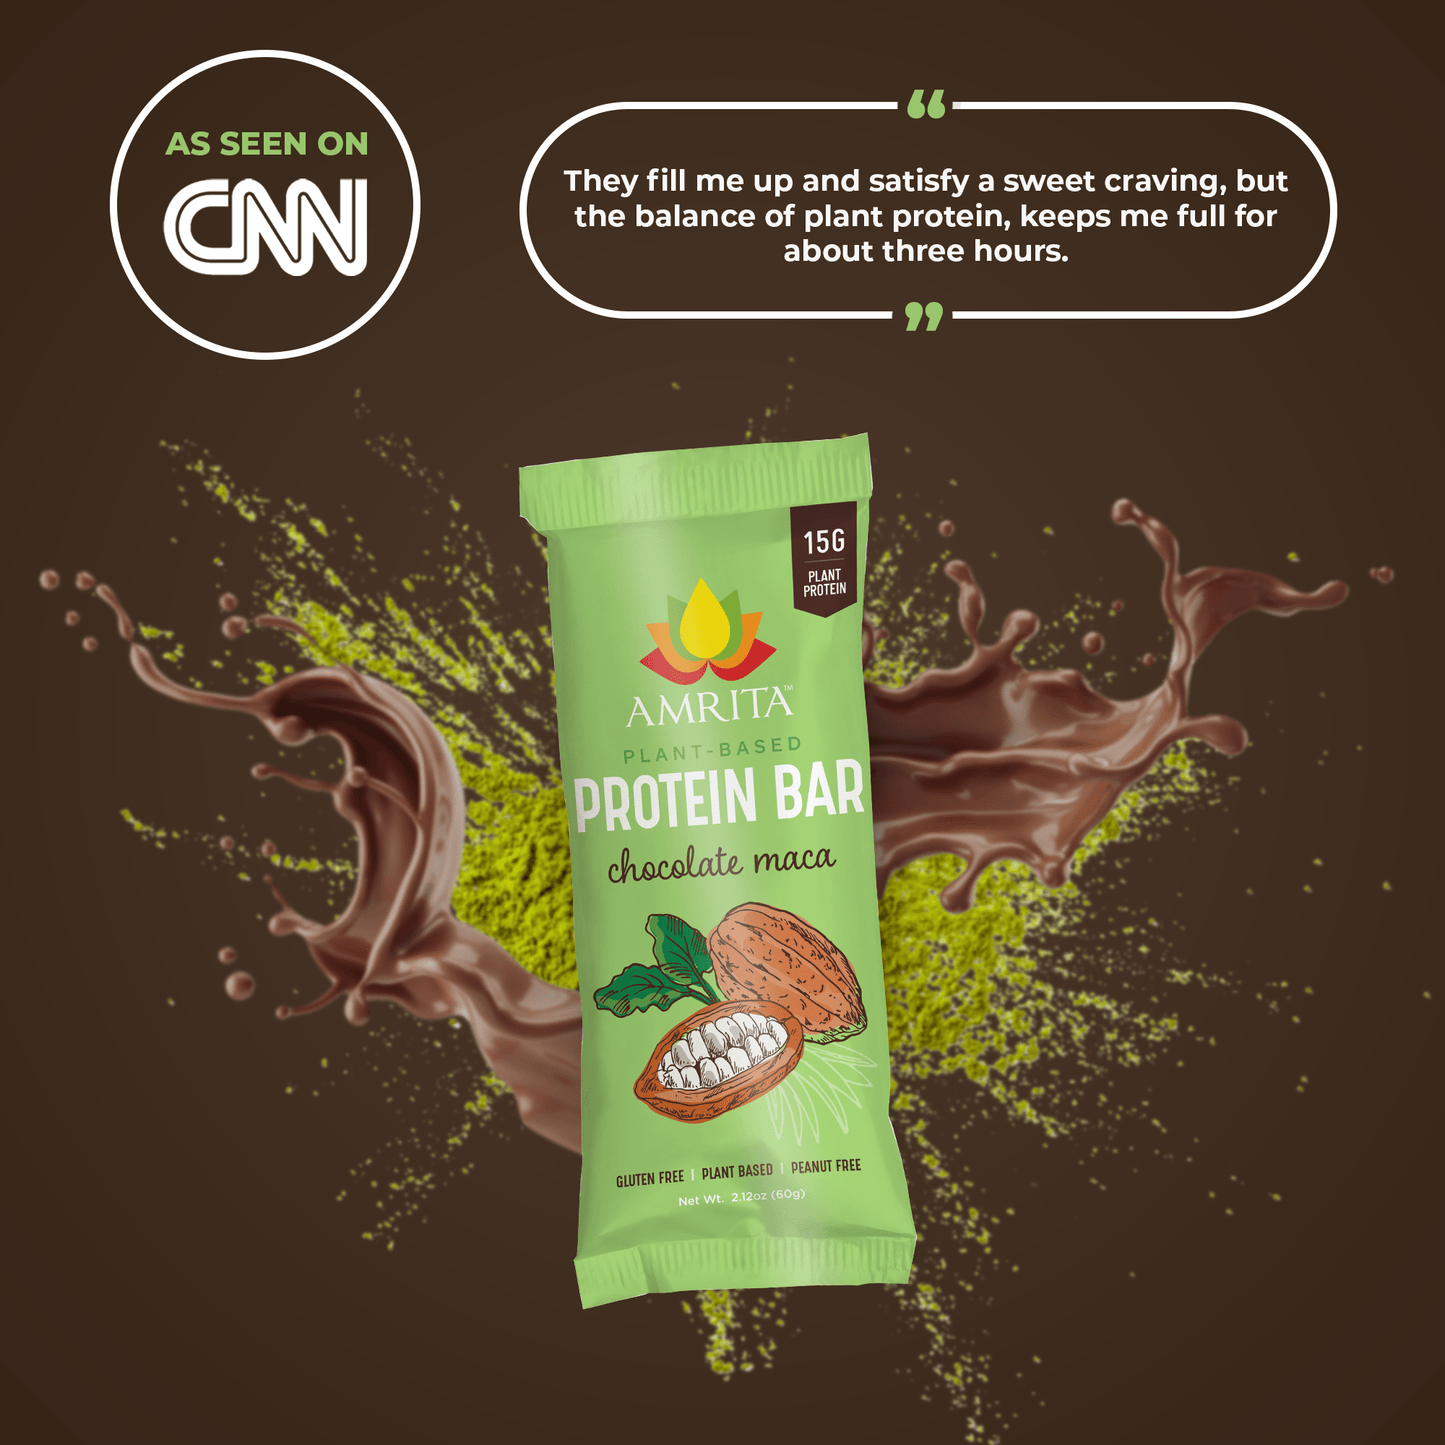 Chocolate Maca Protein Bars fill me up and satisfy a sweet craving, but the balance of plant protein keeps me full for about three hours - Customer review